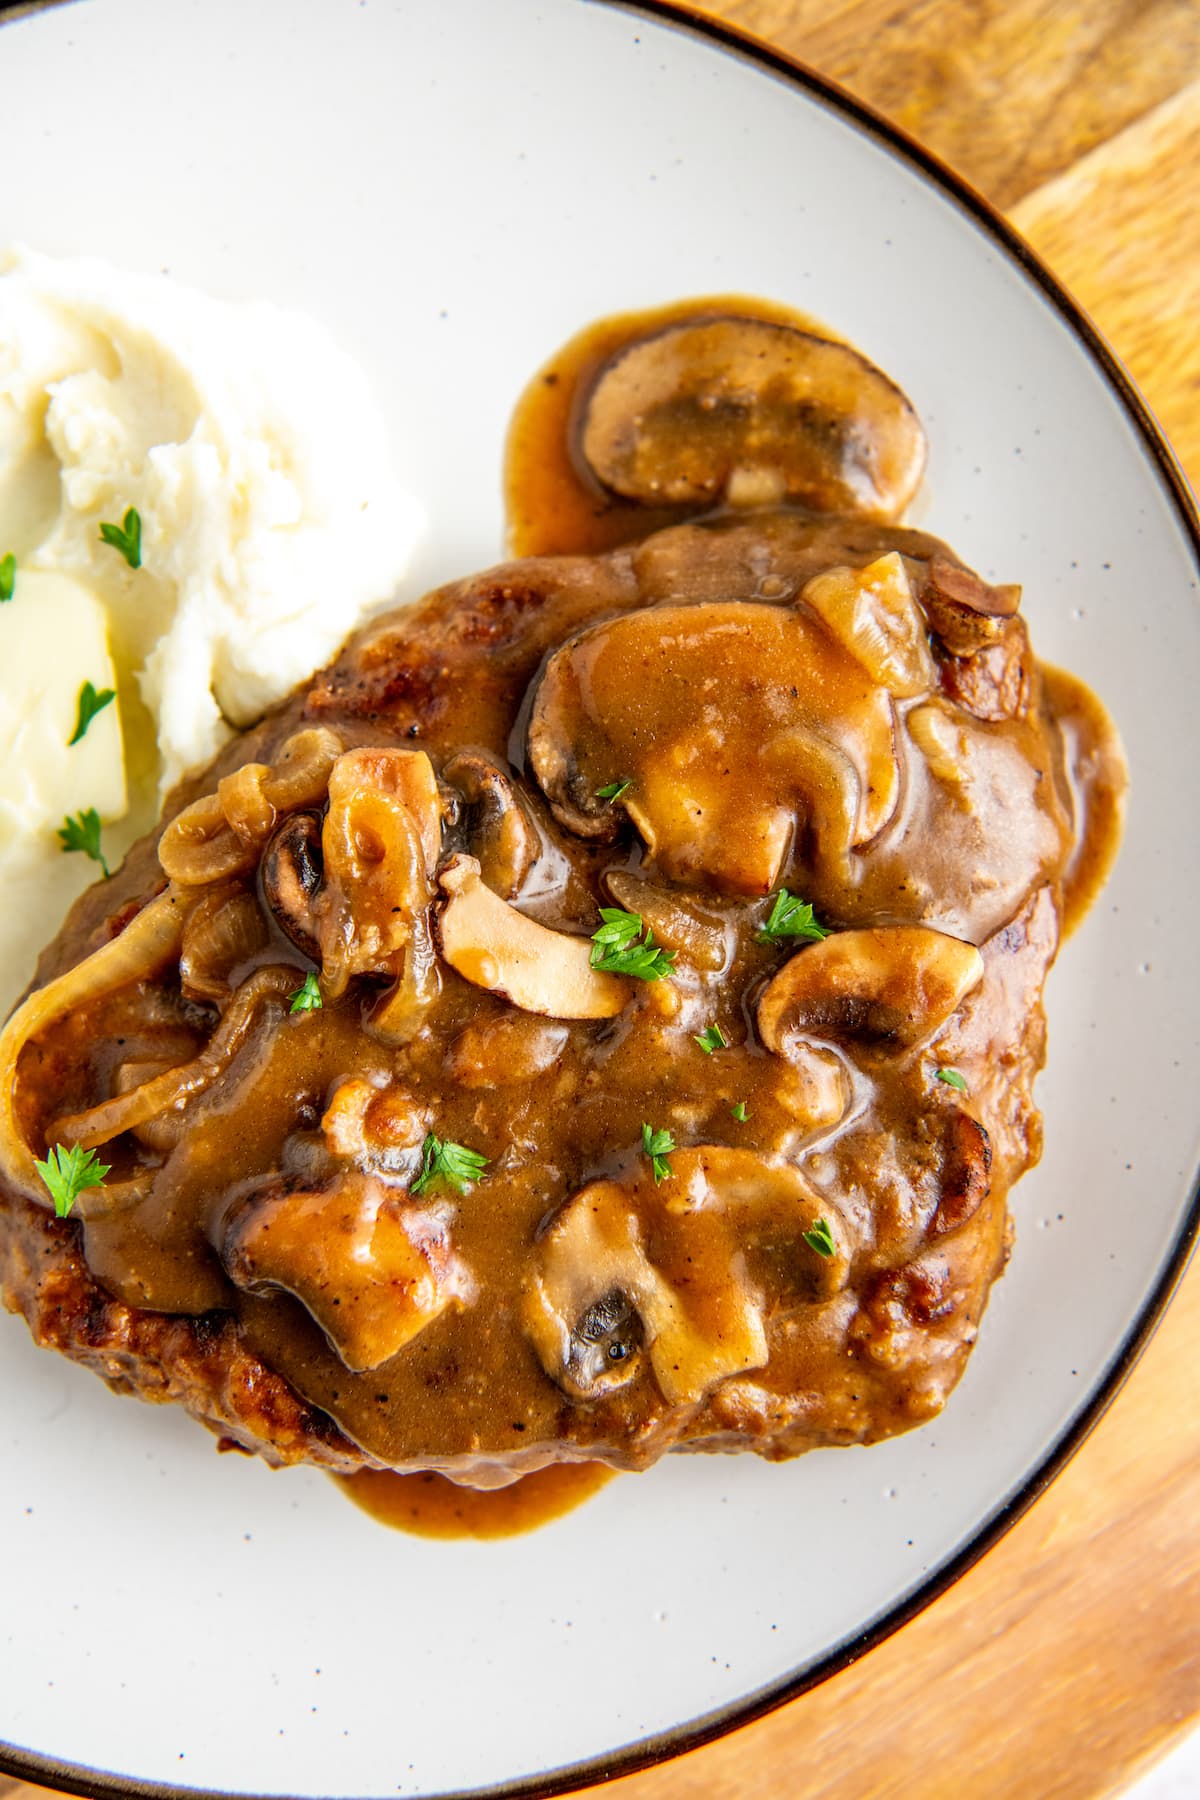 Overhead view of a steak covered in gravy and mushrooms